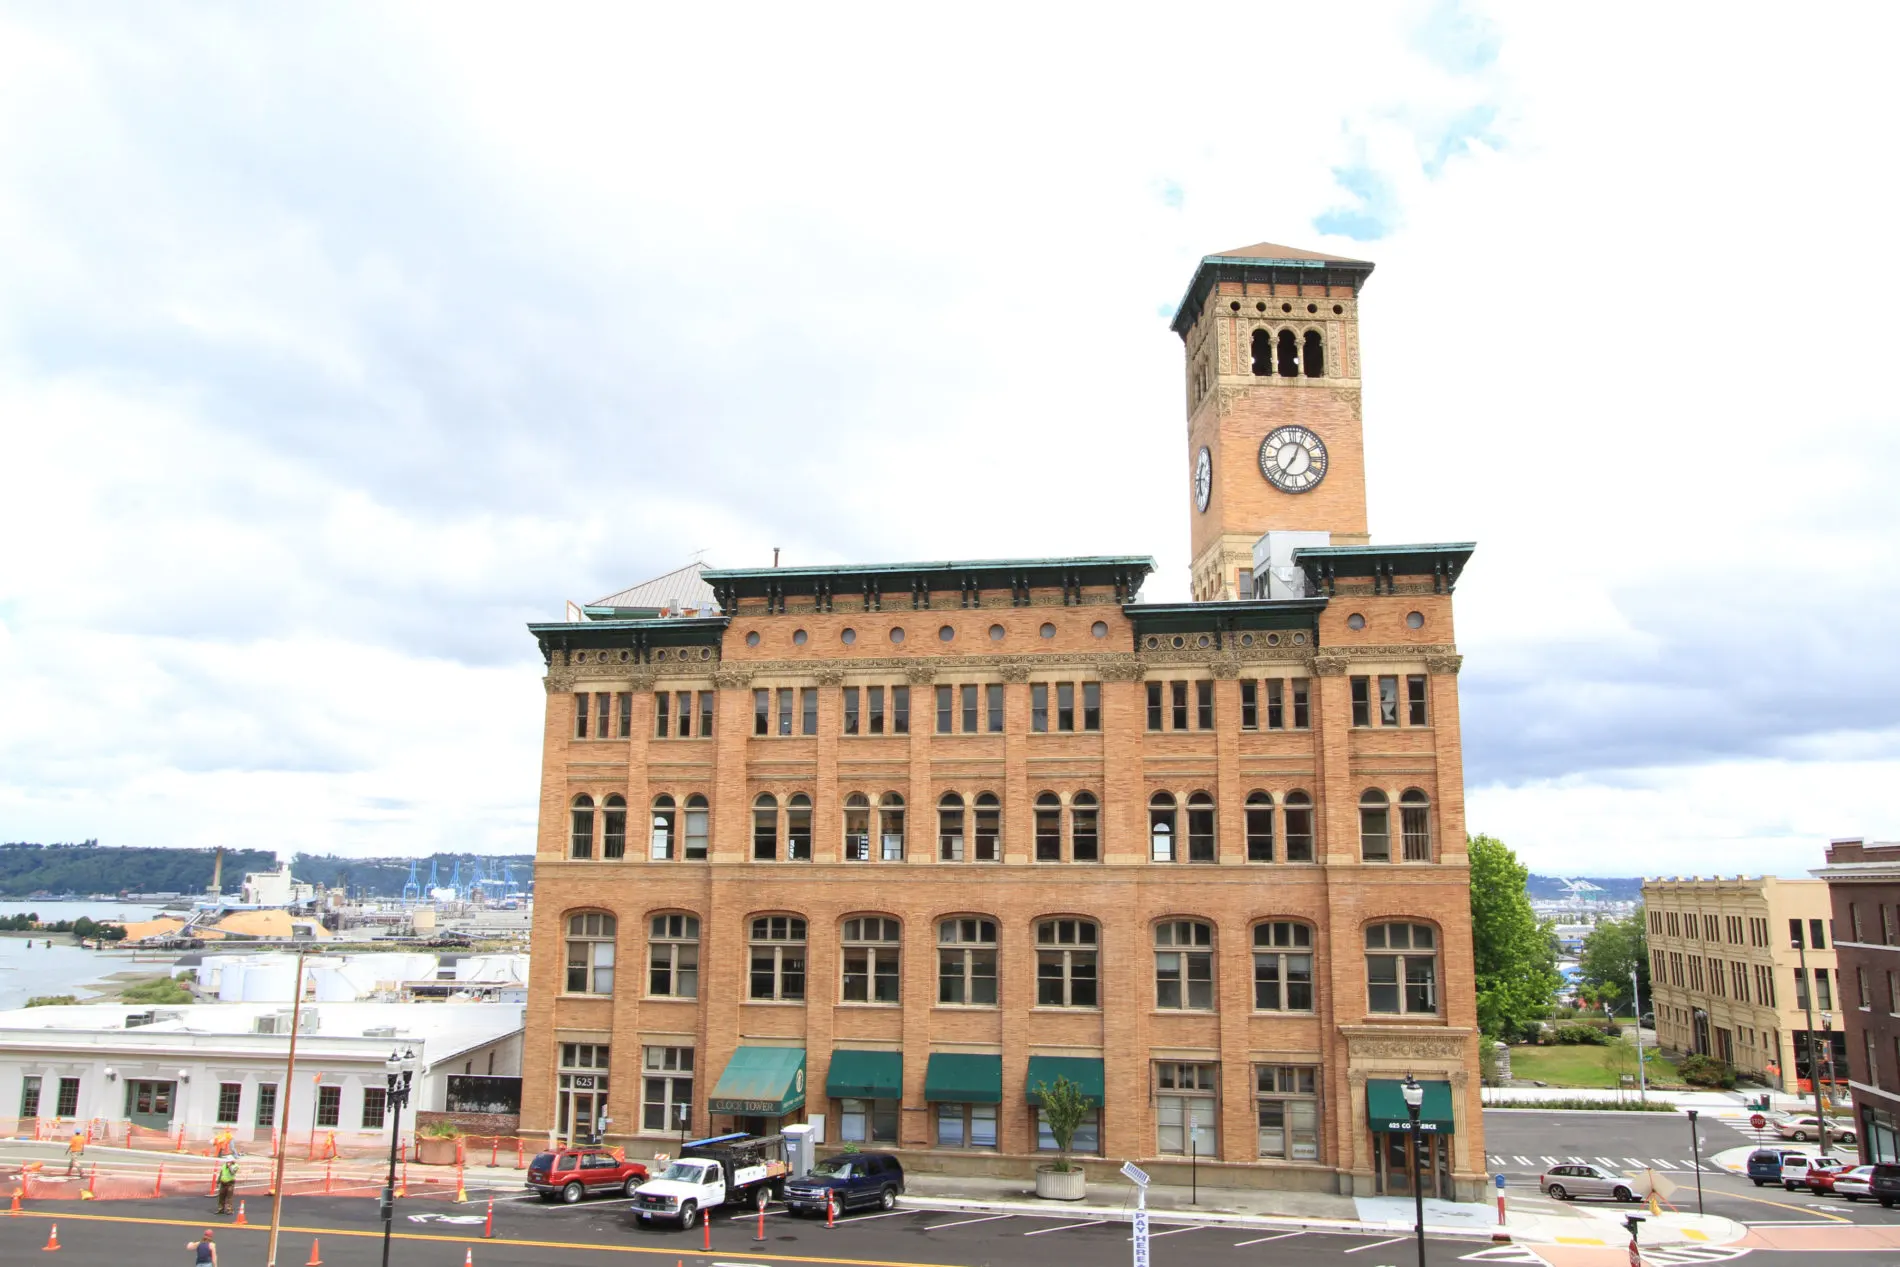 The Old City Clock Tower, located in downtown Tacoma, is just one of the many attractions worth stopping for when taking an I-5 road trip.